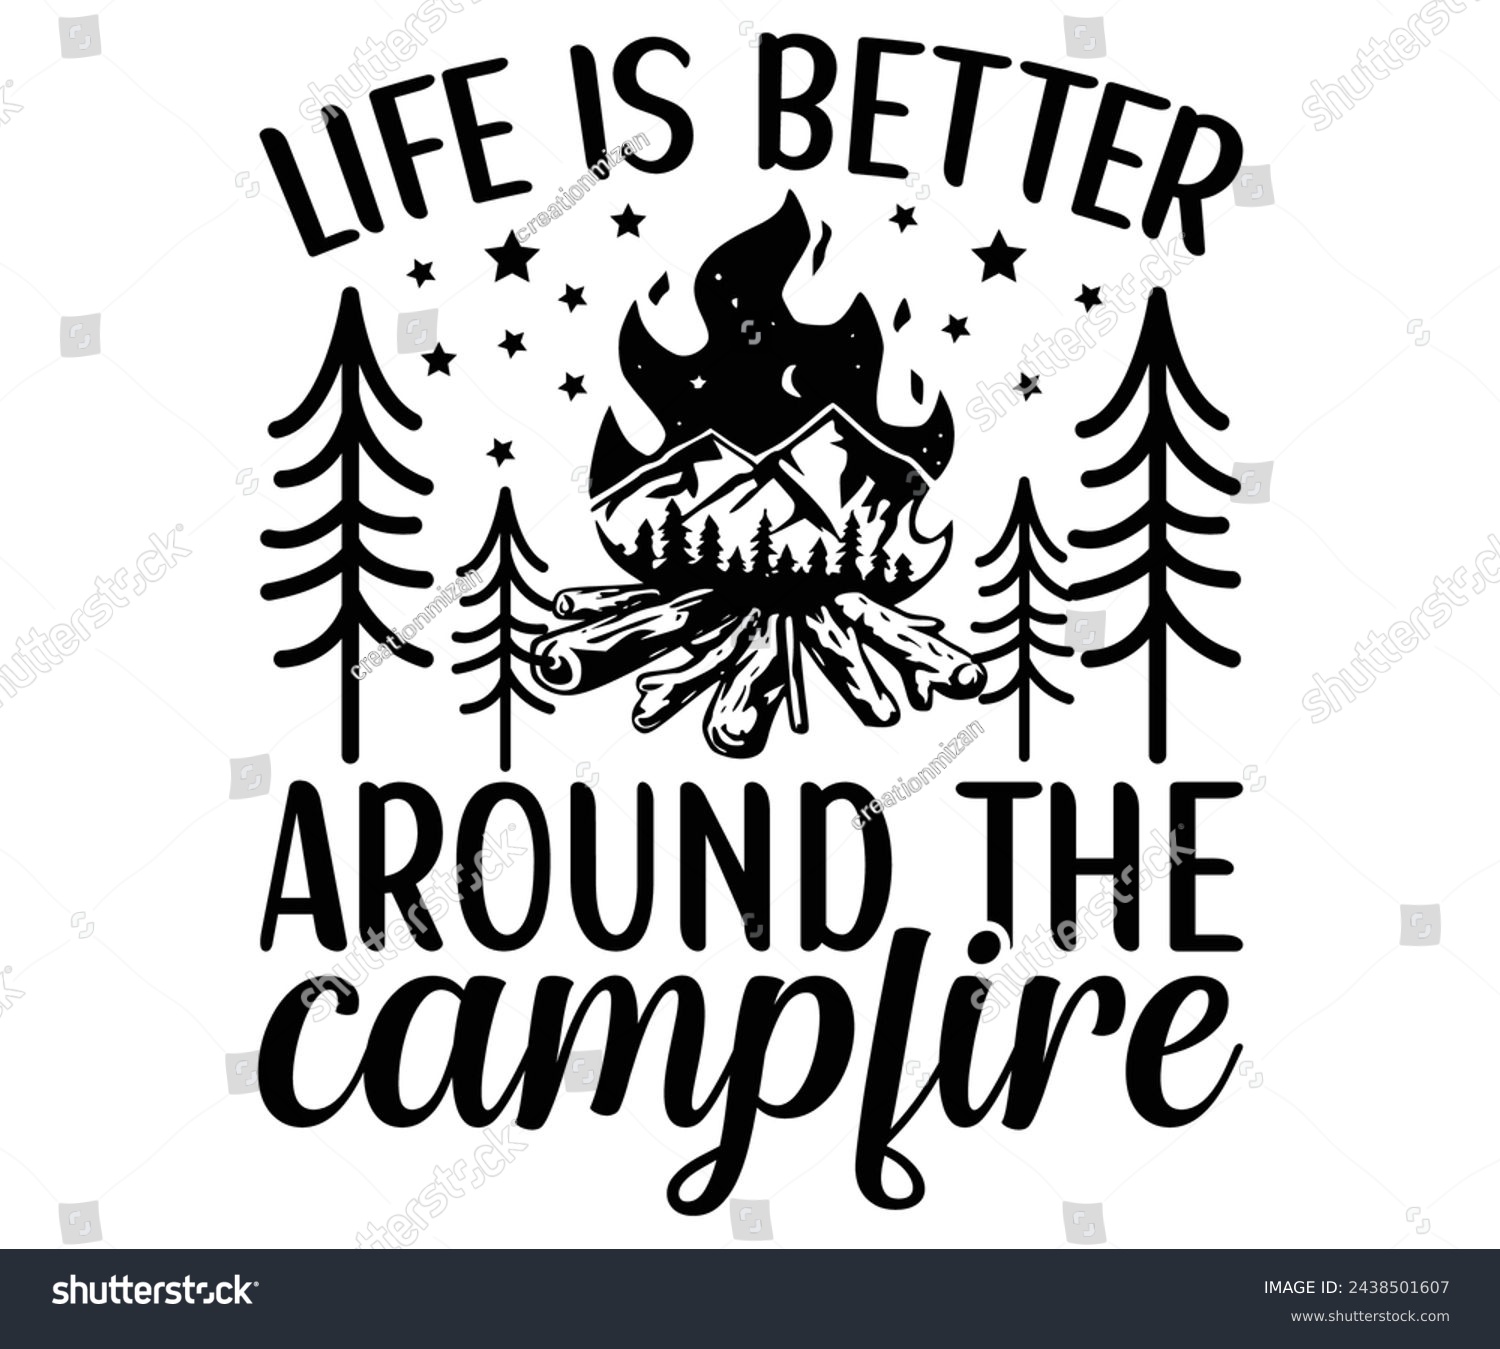 SVG of Life Is Better Around The Campfire Svg,Camping Svg,Hiking,Funny Camping,Adventure,Summer Camp,Happy Camper,Camp Life,Camp Saying,Camping Shirt svg